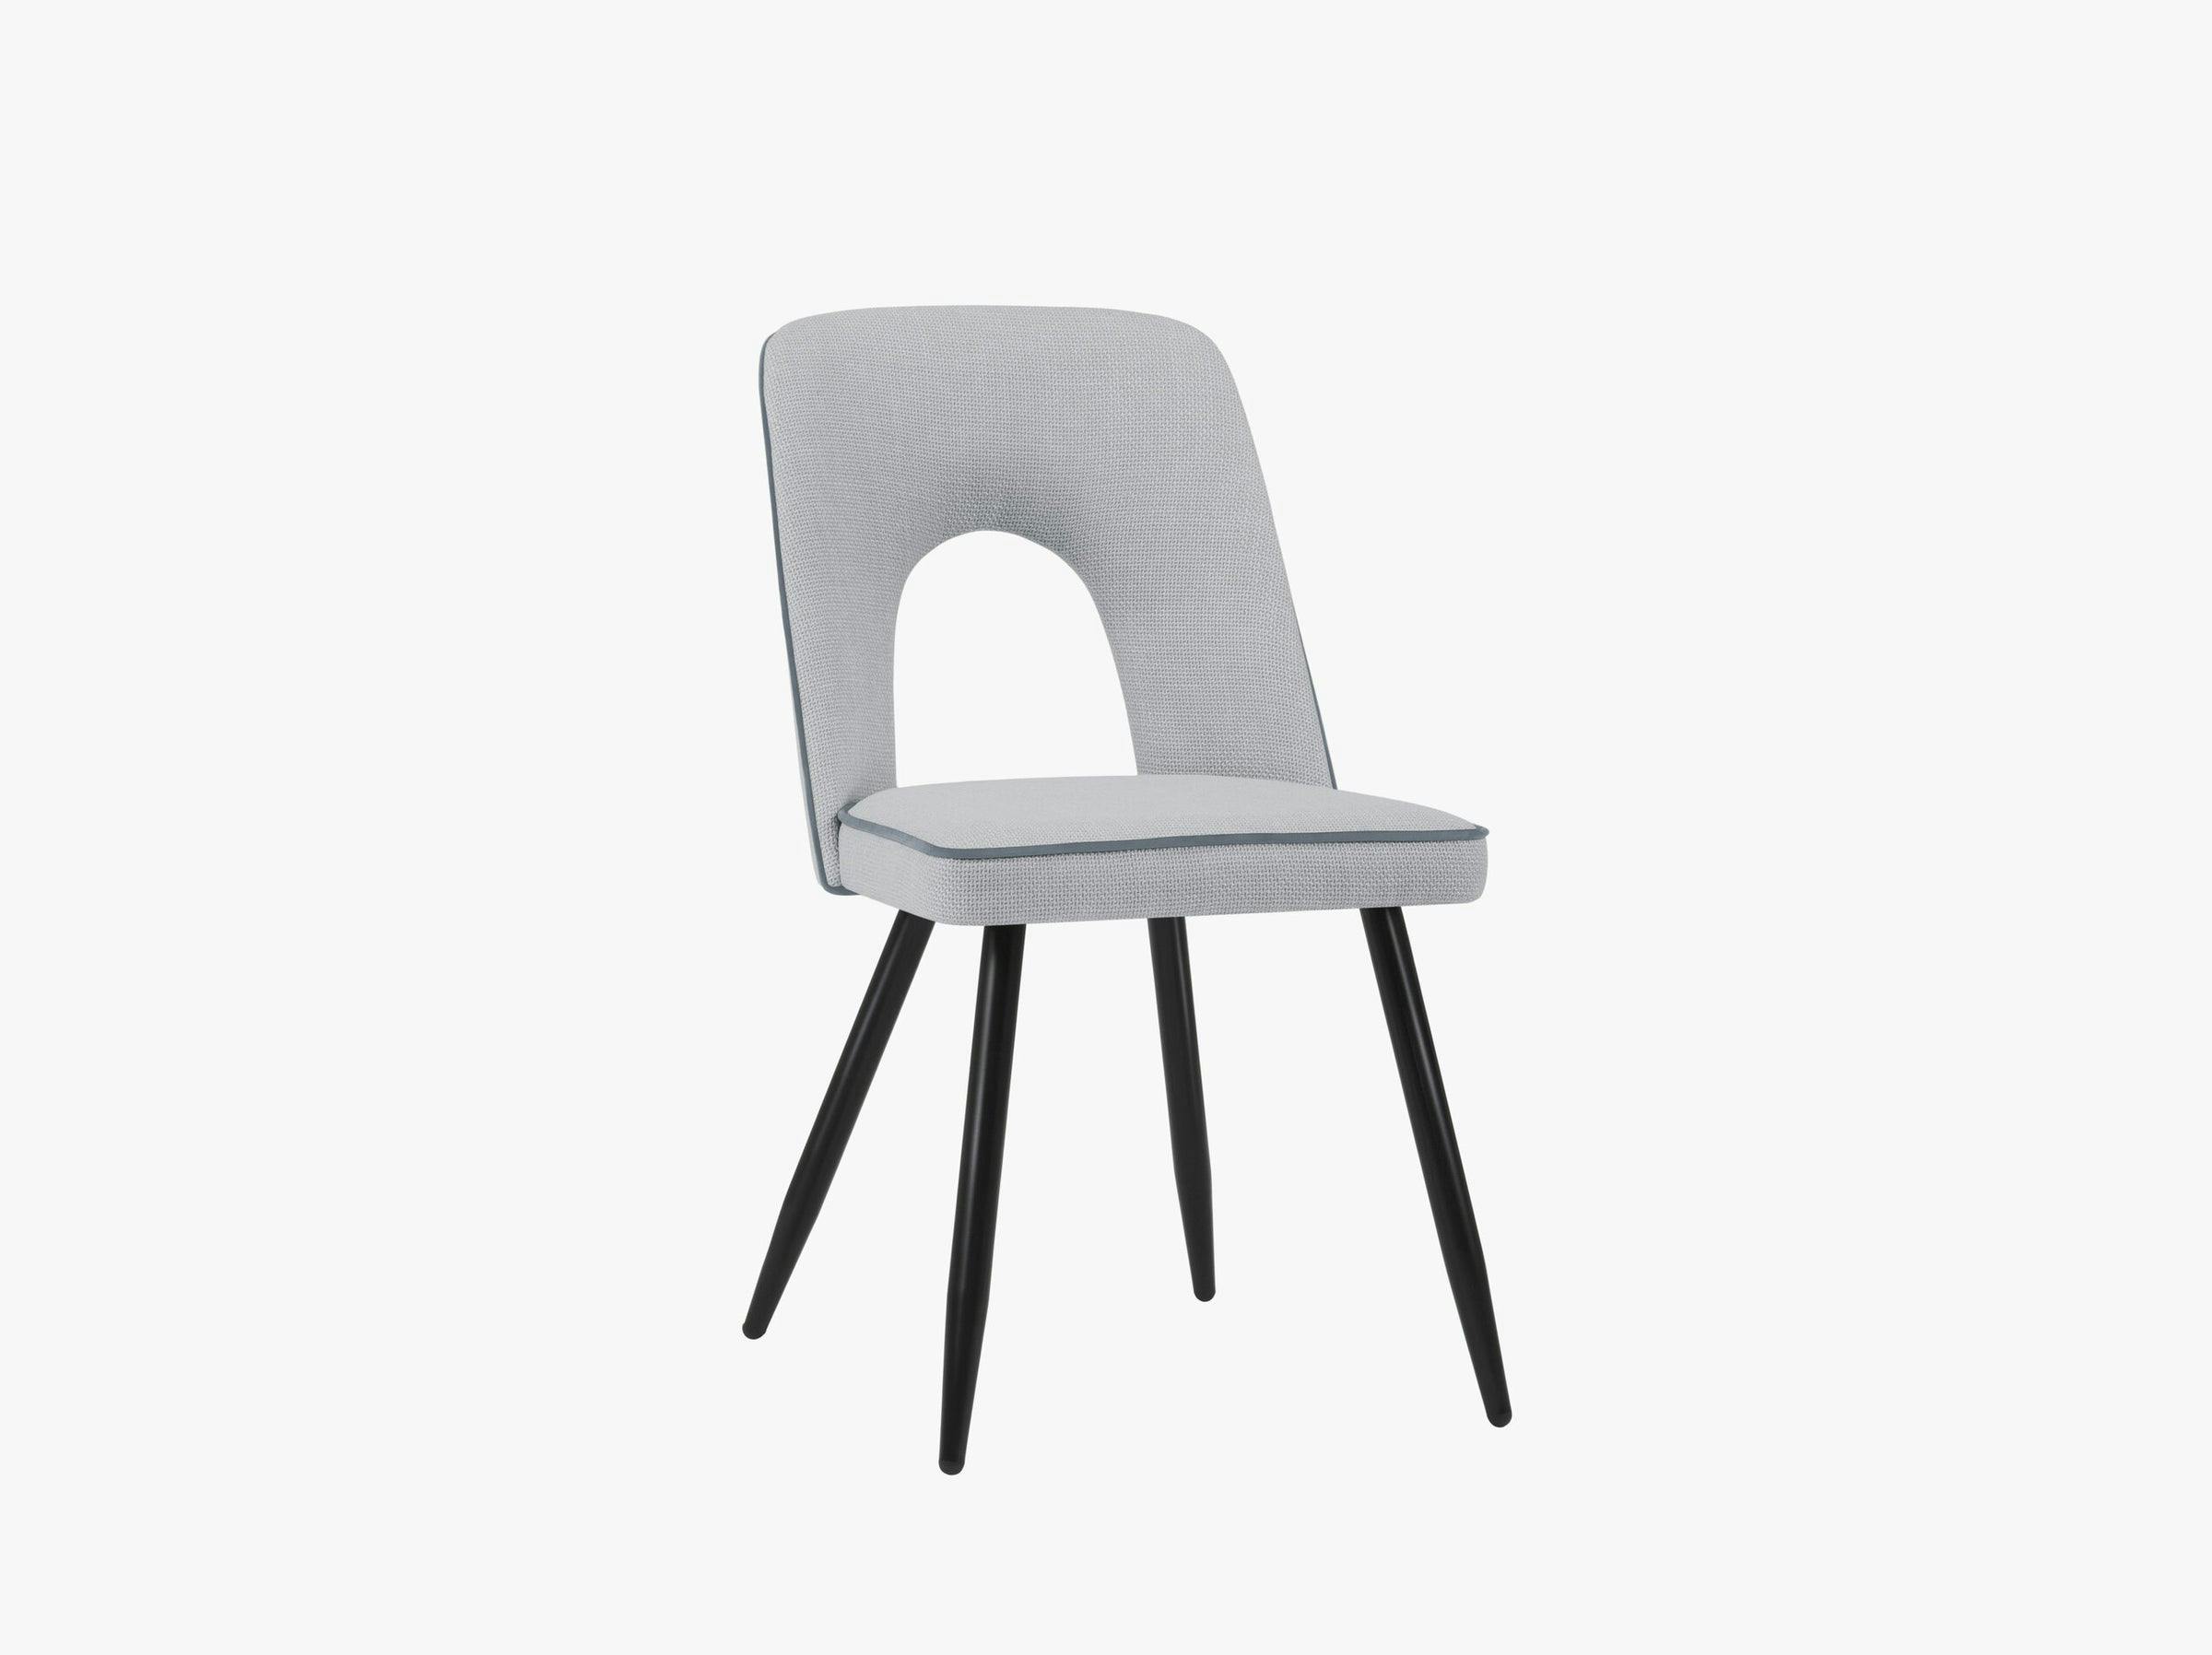 Tim tables & chairs structured fabric light grey